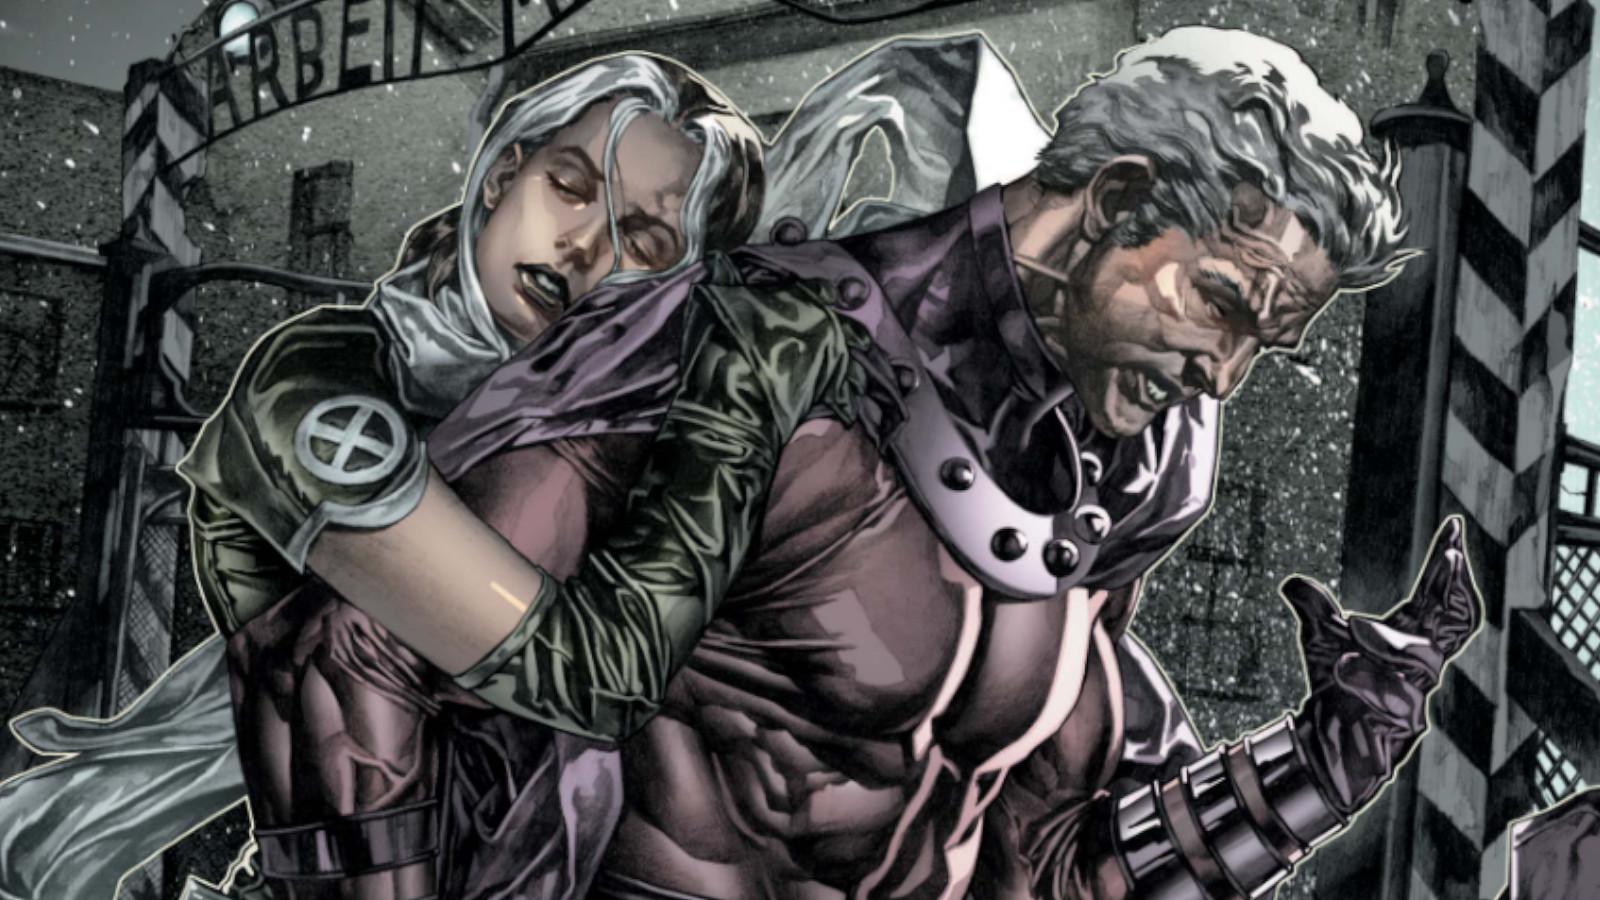 Rogue & Magneto from X-Men Legacy